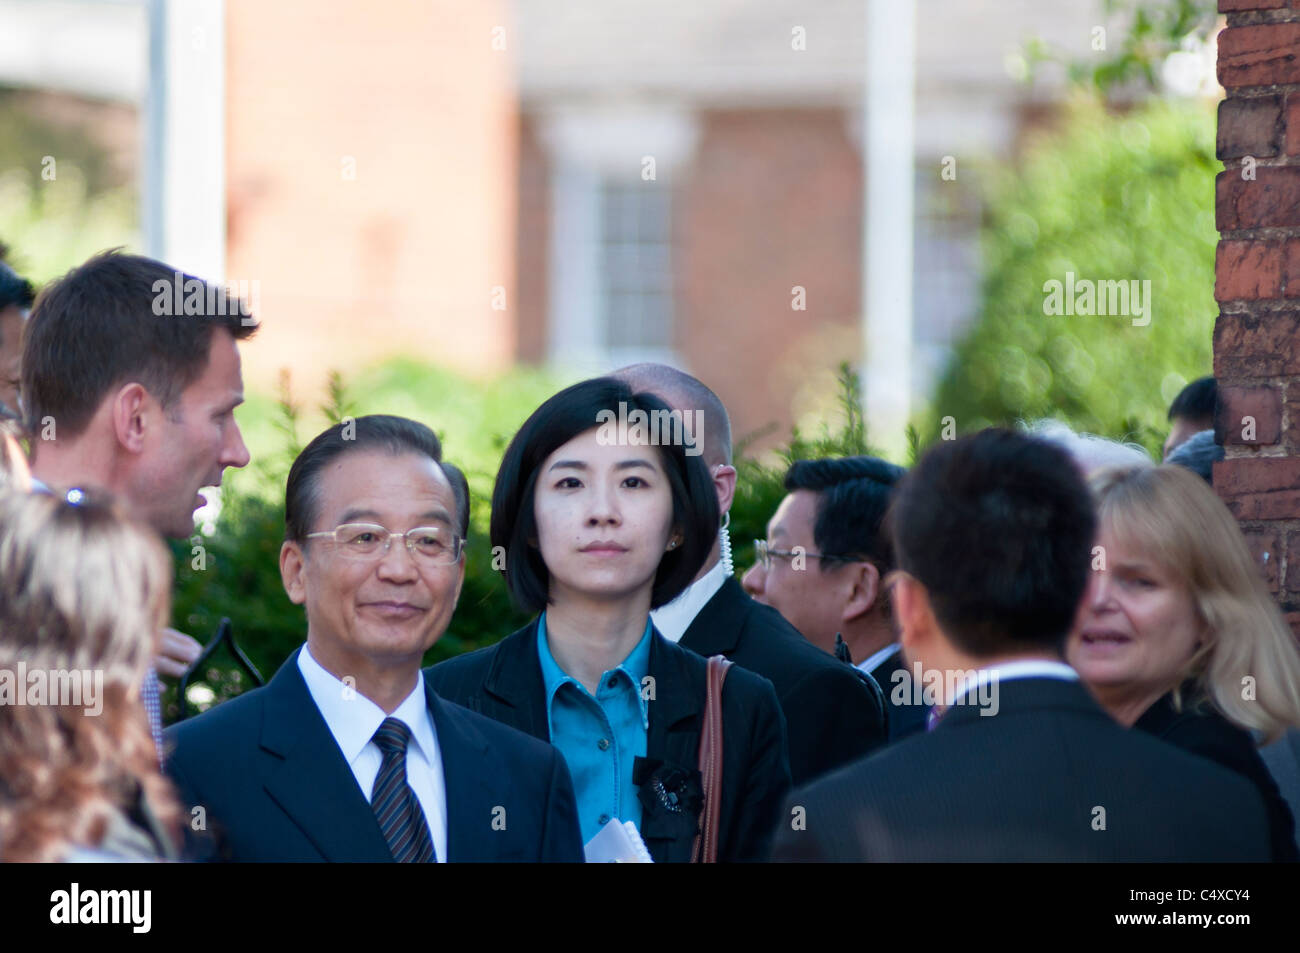 Chinese Prime Minister Wen Jiabao and interpreter with Culture secretary Jeremy Hunt visiting Stratford upon Avon, UK 2011. Stock Photo